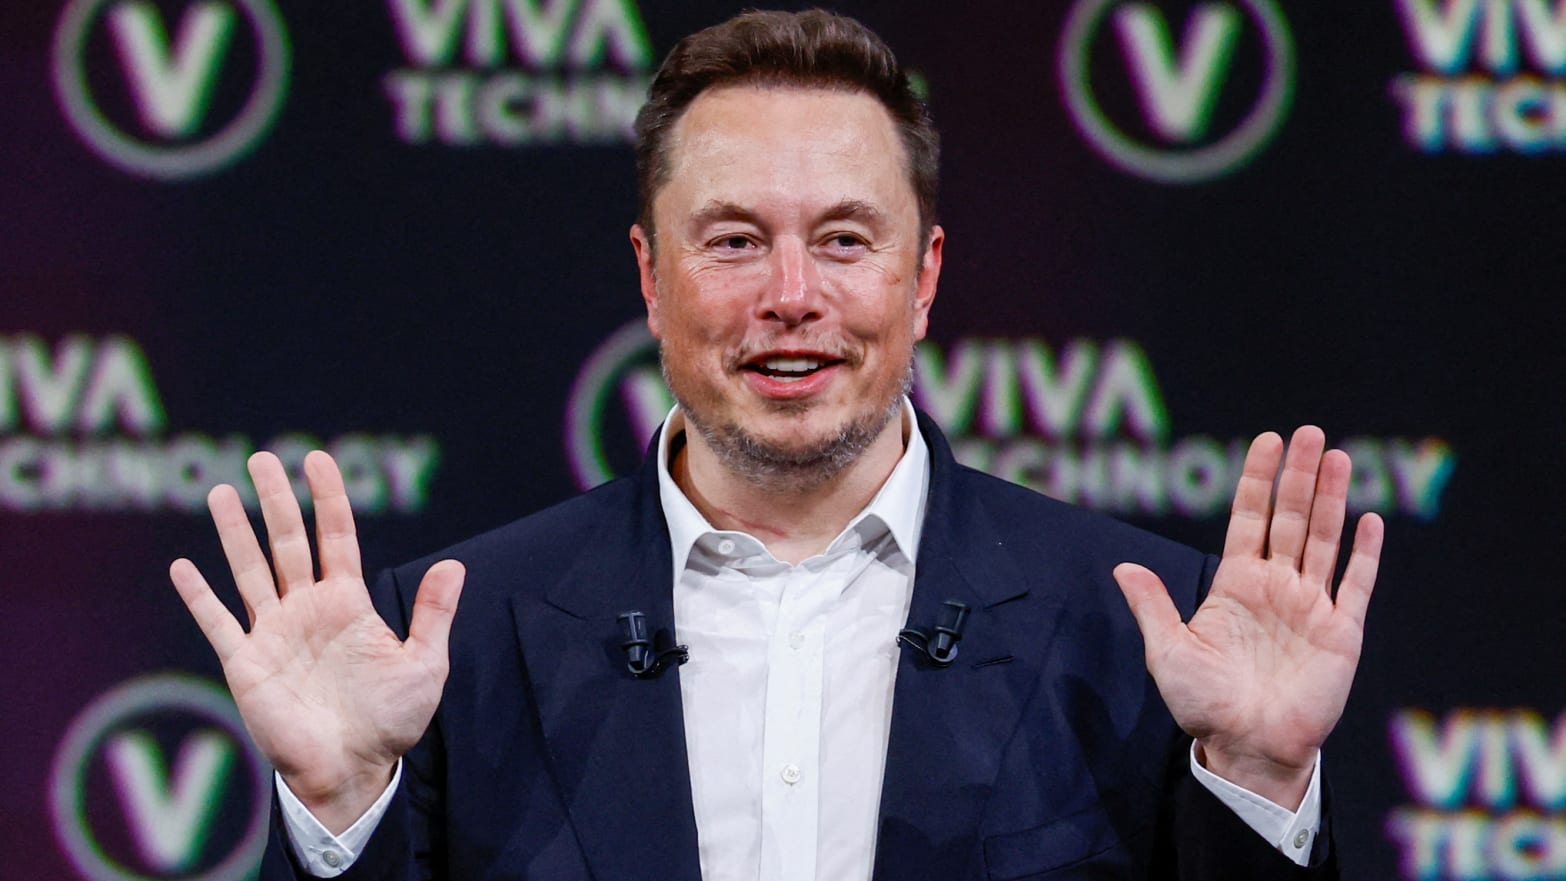 Elon Musk, Chief Executive Officer of Tesla and owner of Twitter